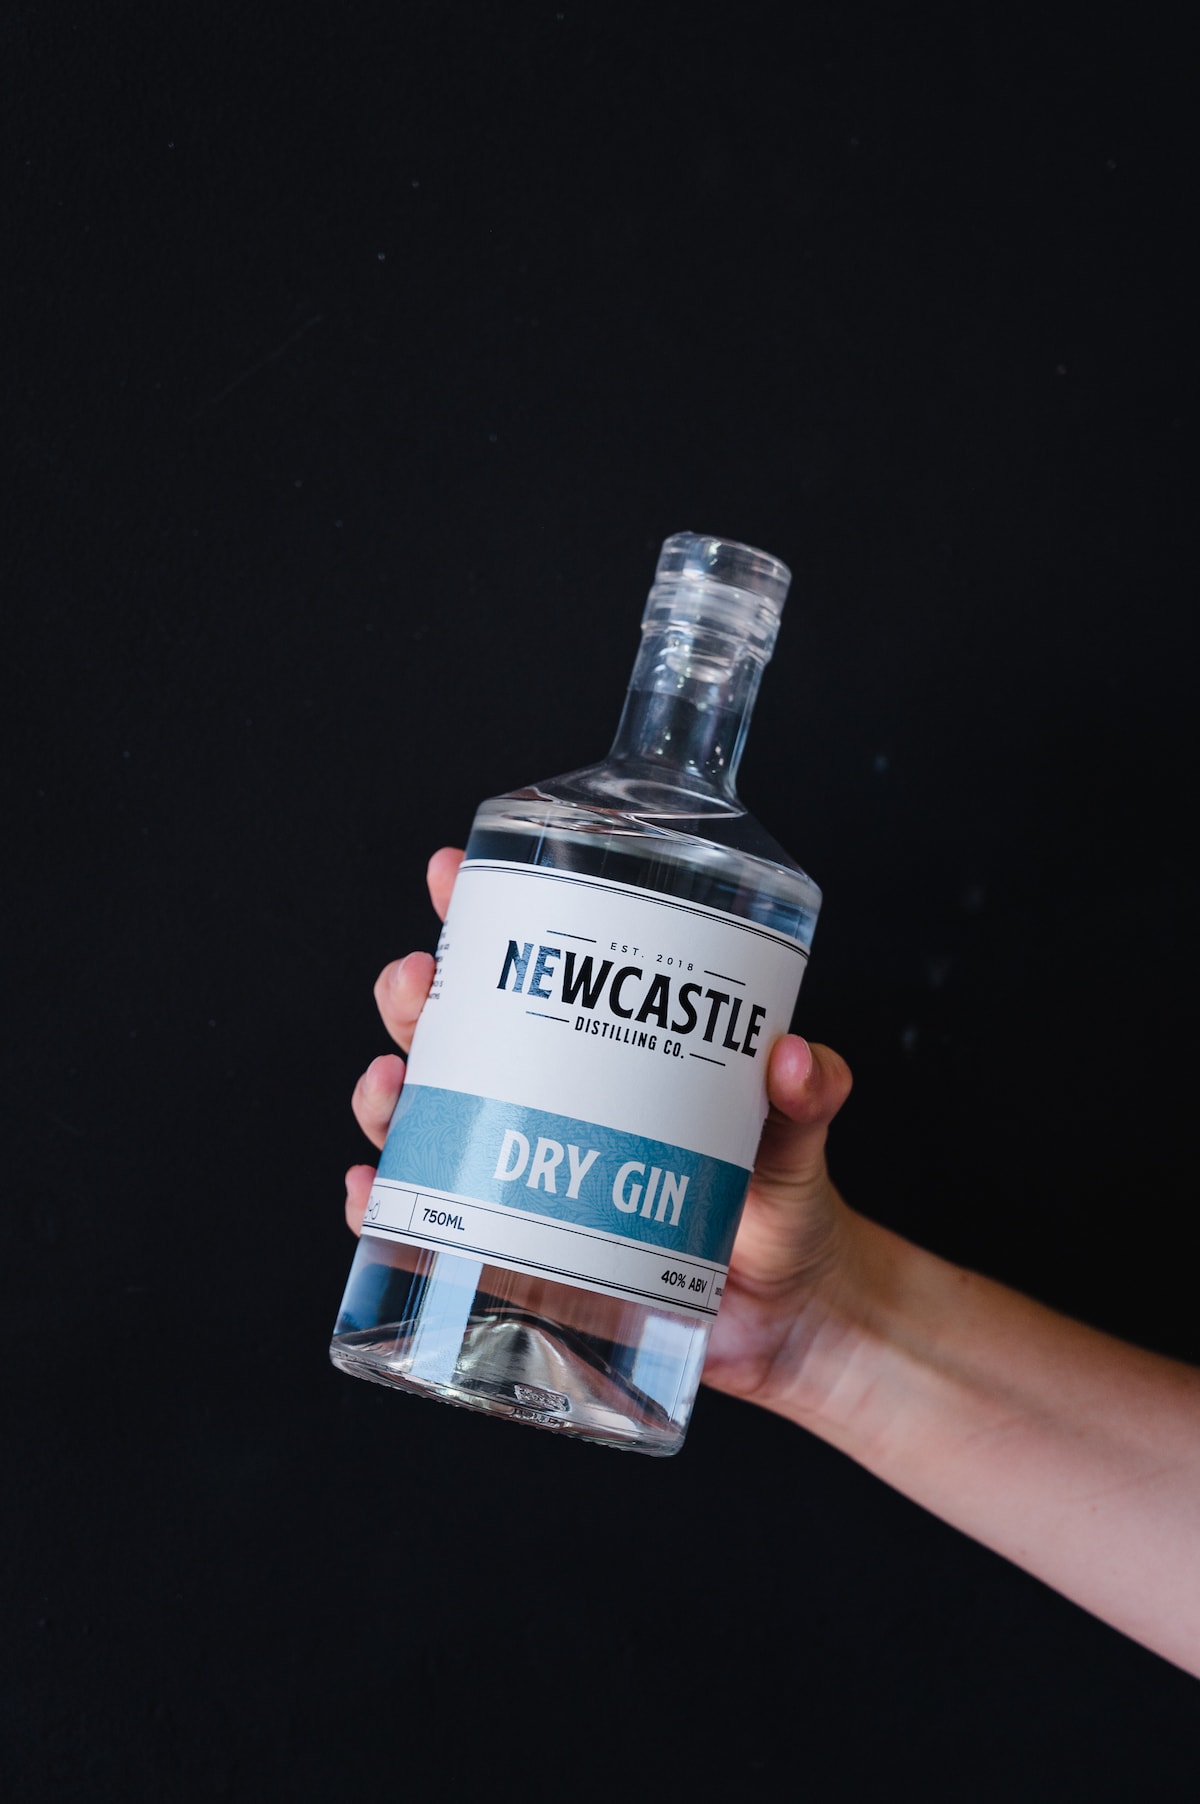 world gin day local gin distillery newcastle central coast hunter valley port stephens nsw